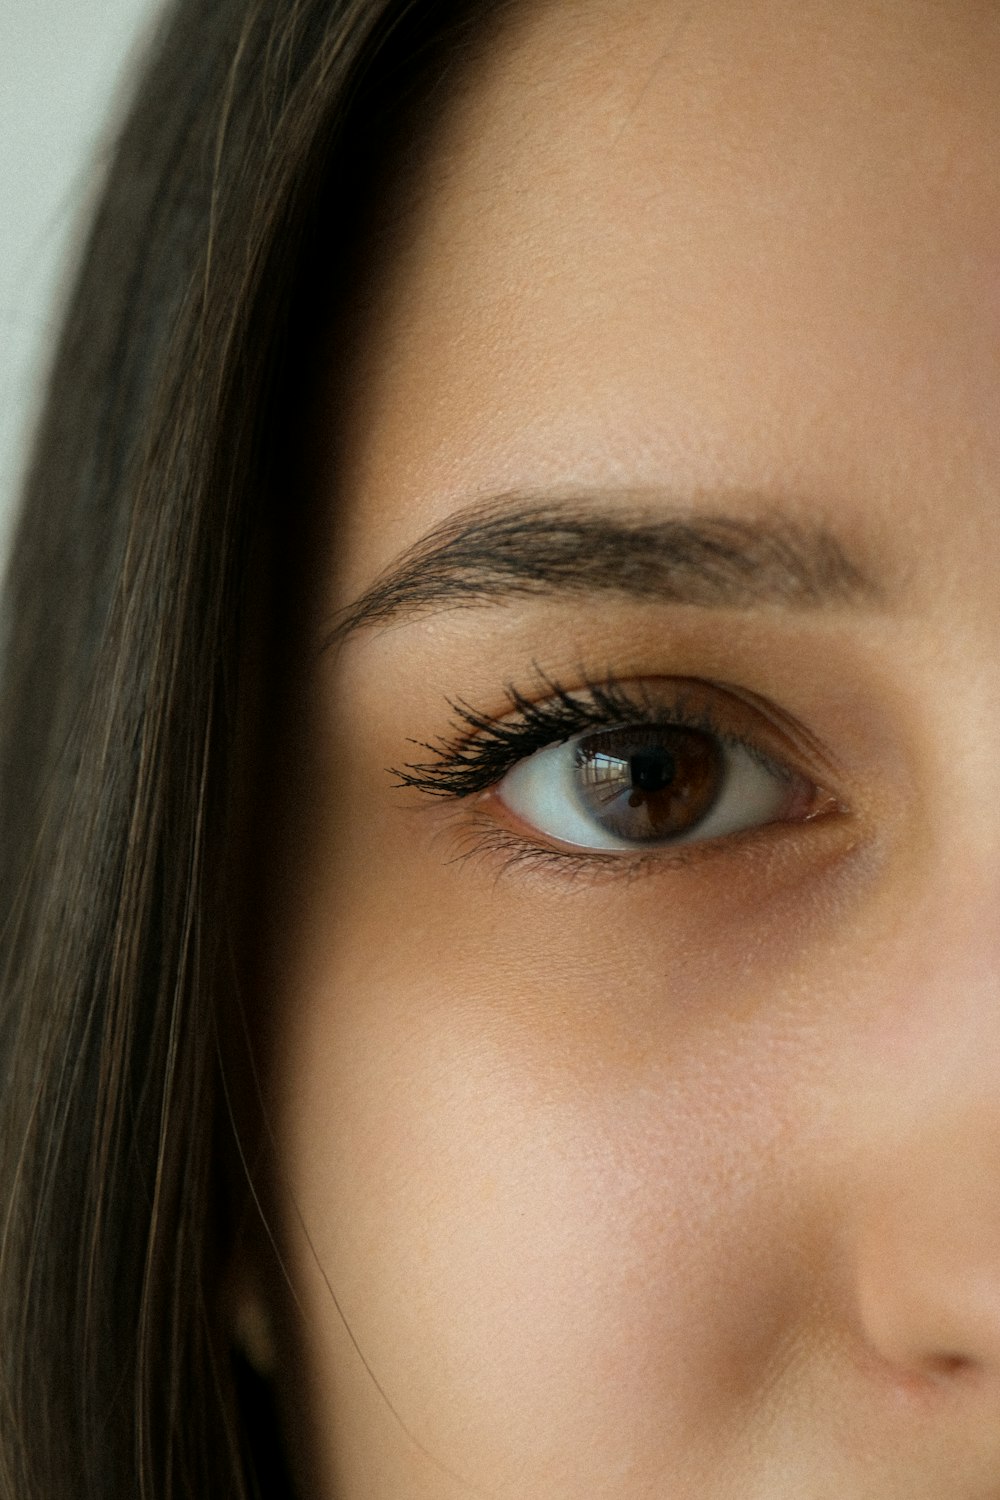 a close up of a woman's eye with long lashes